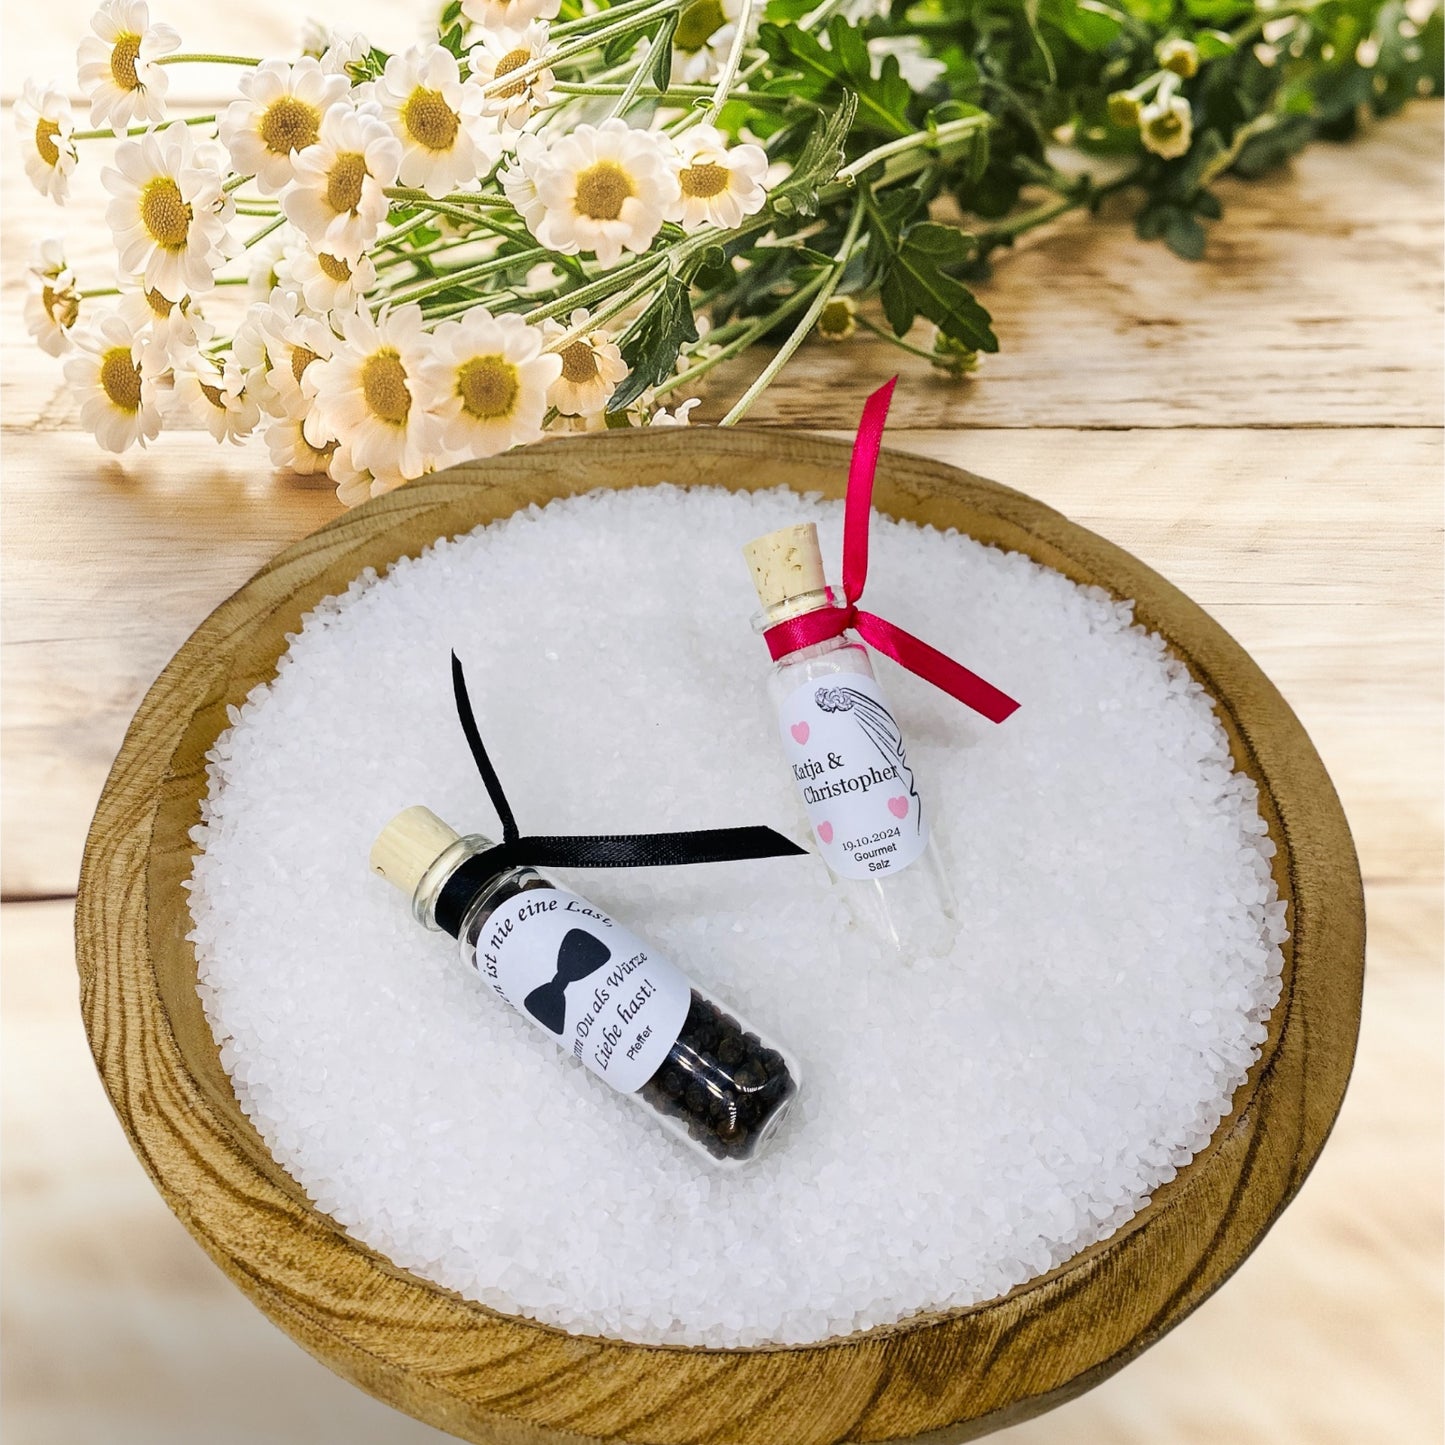 Salt and pepper as a timeless guest gift for your wedding reception